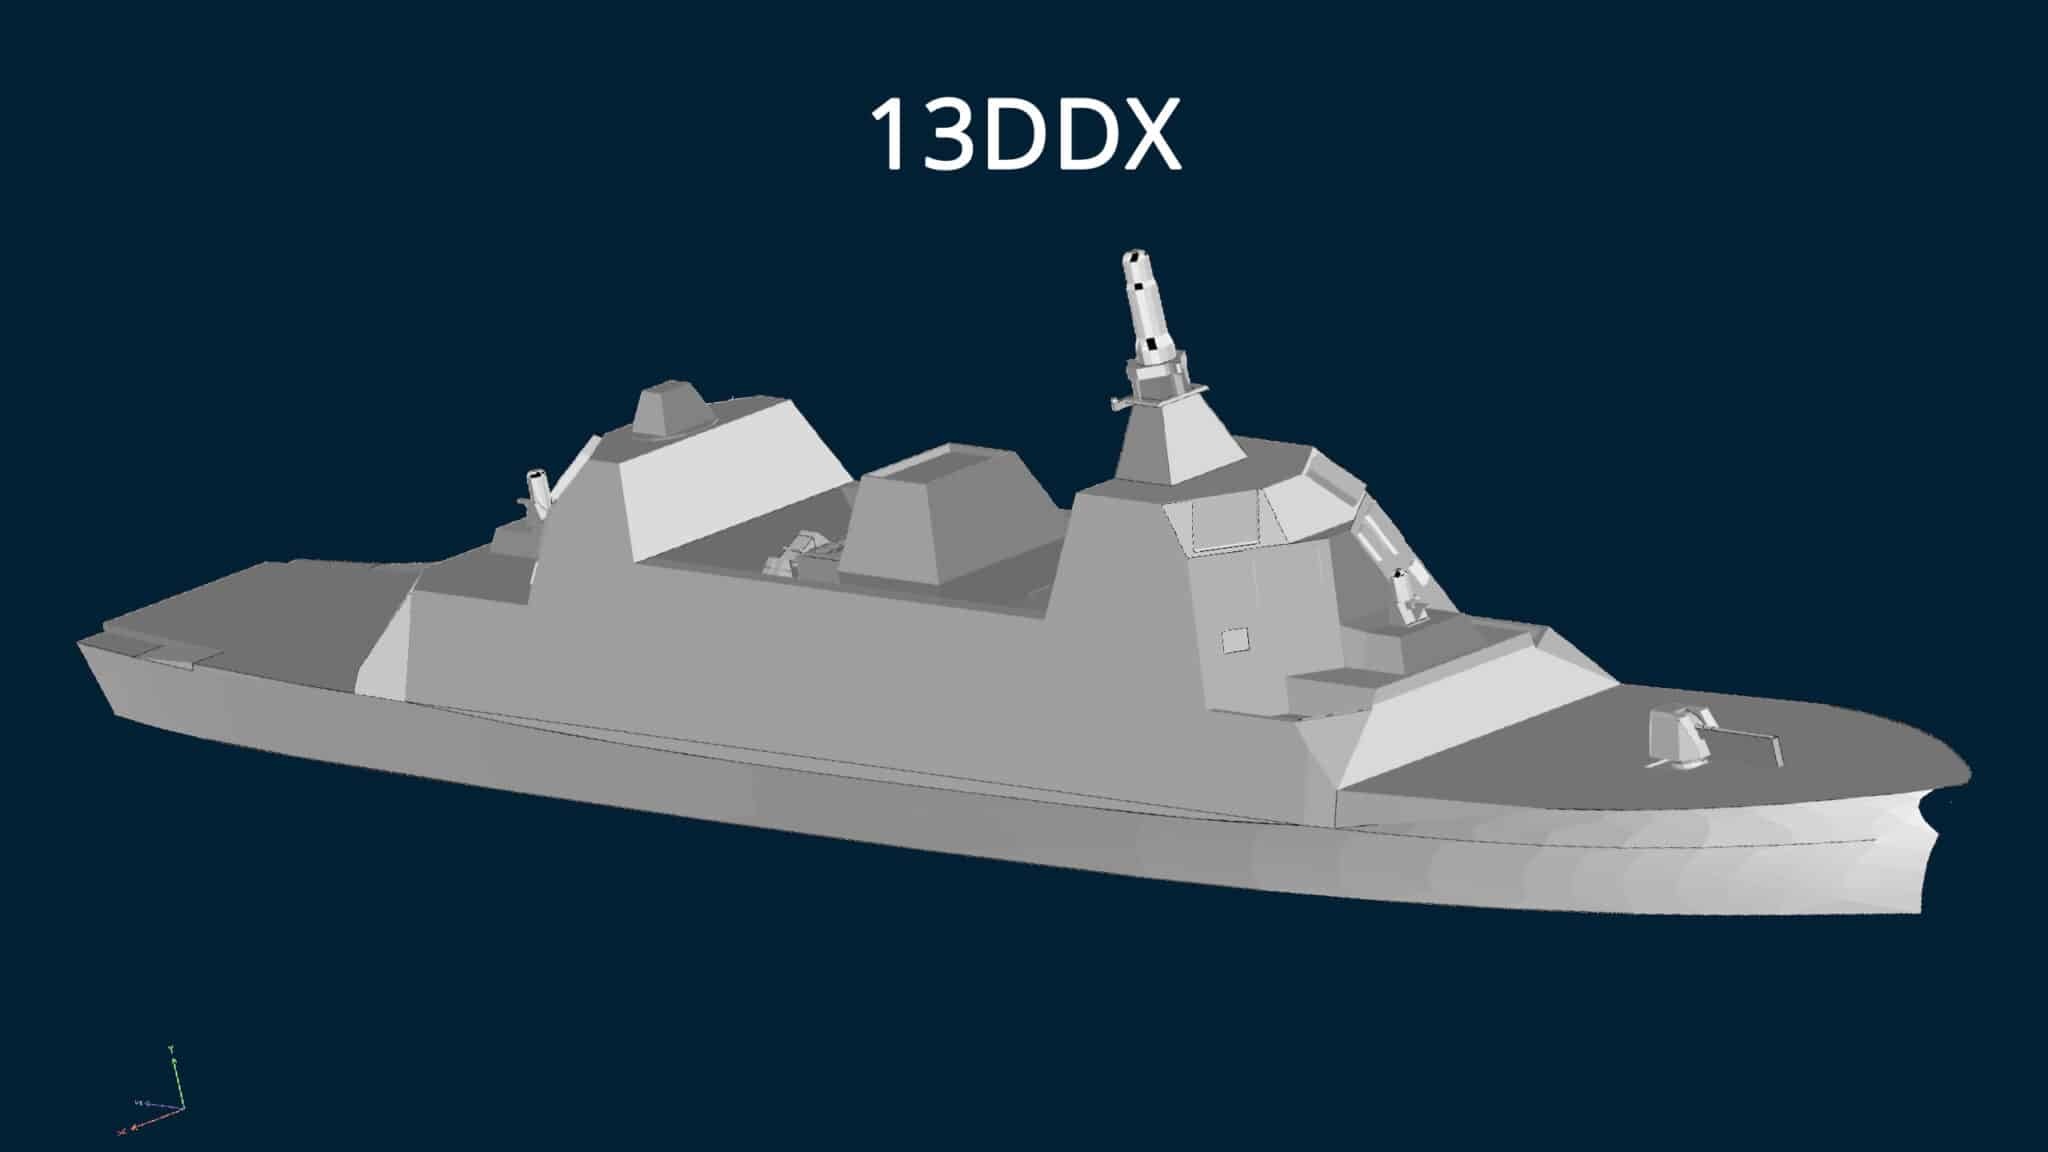 Japan Charts a Bold Course with the New 13DDX Air Defence Destroyer